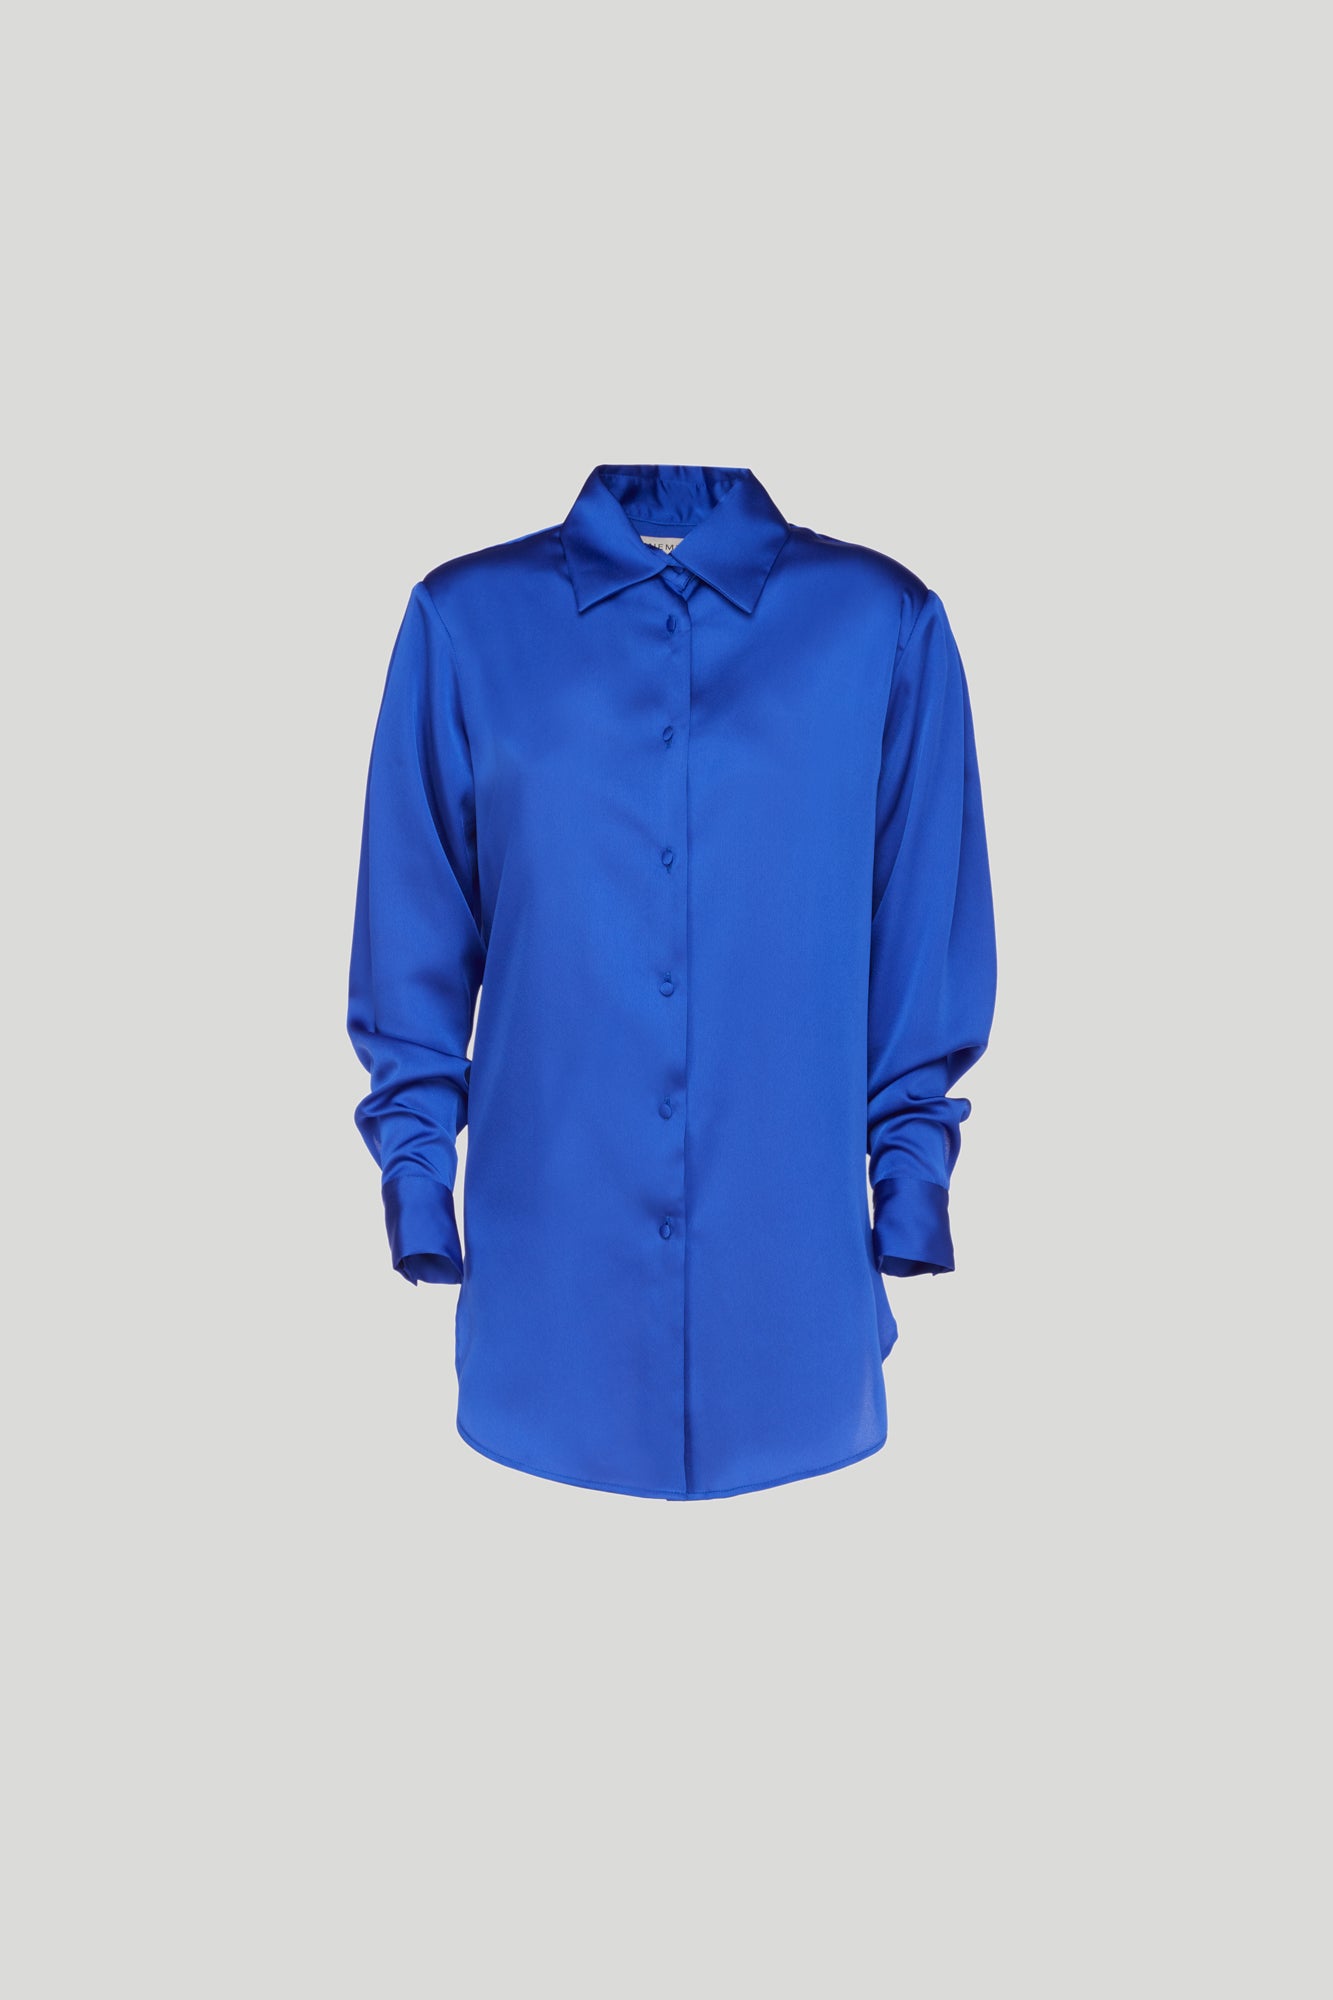 NINEMINUTES The Up Silk Blue Shirt